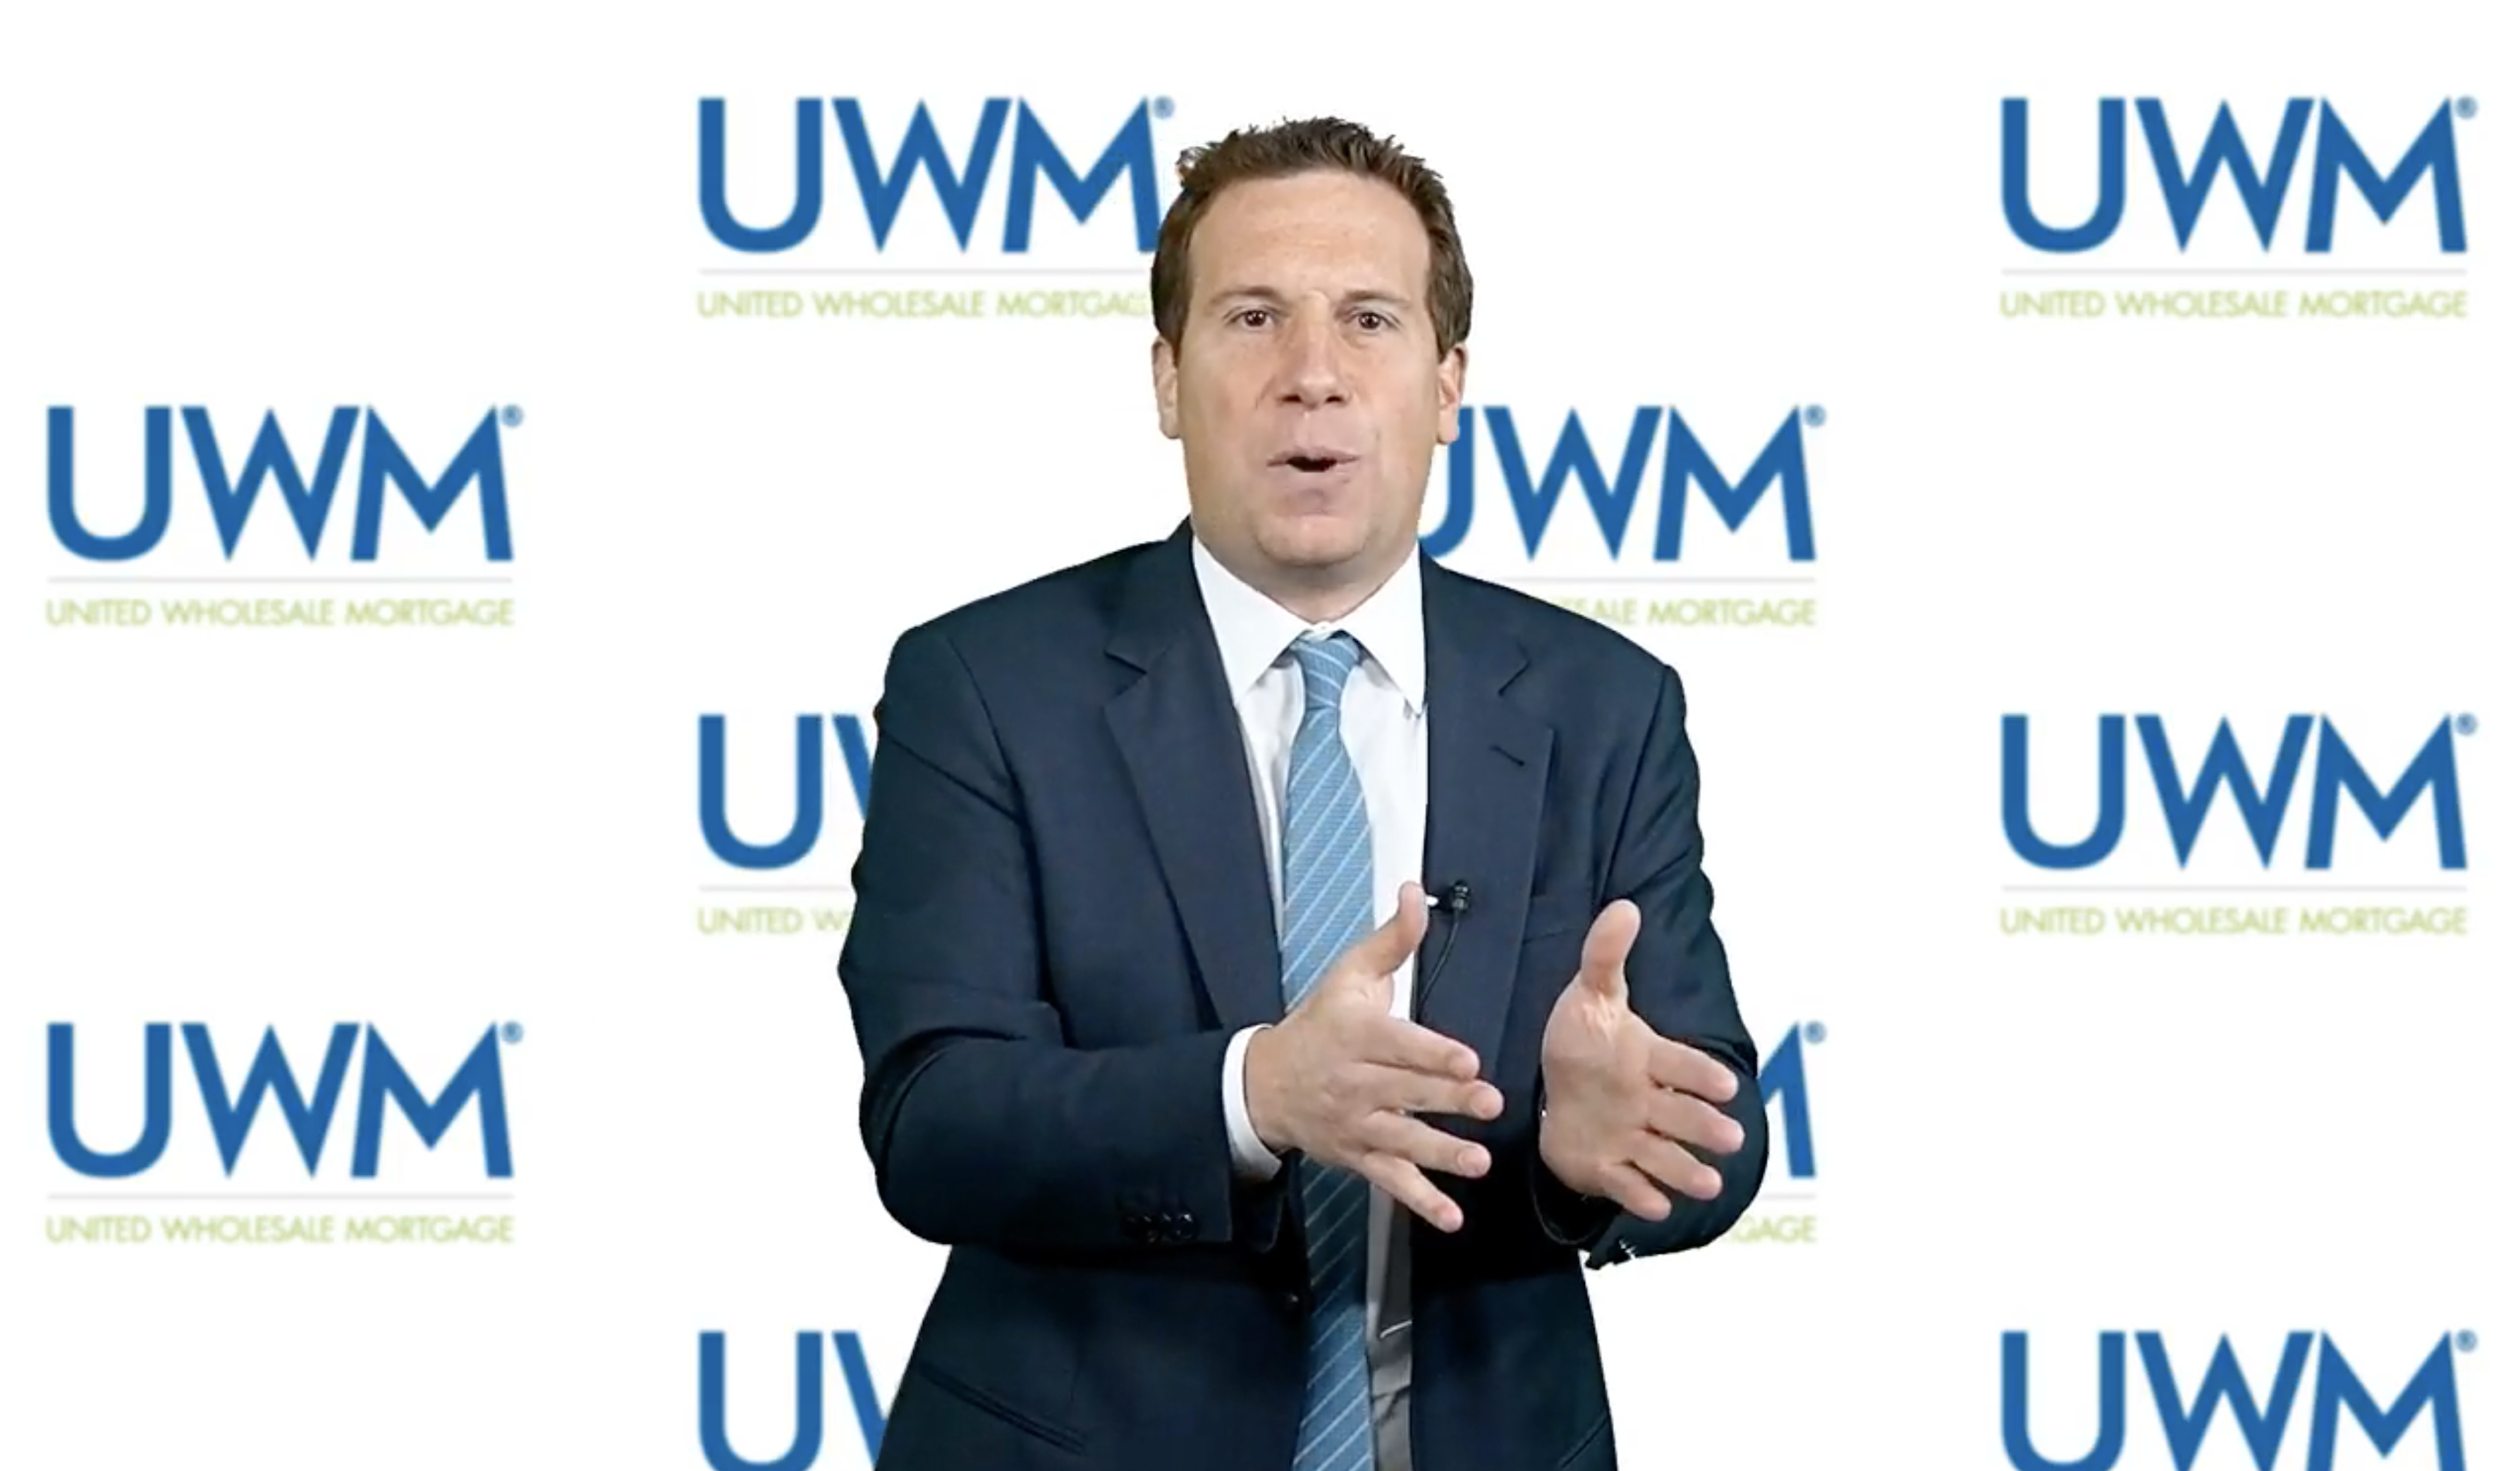 UWM Embattled on Multiple Fronts Over Treatment of Lenders, Employees